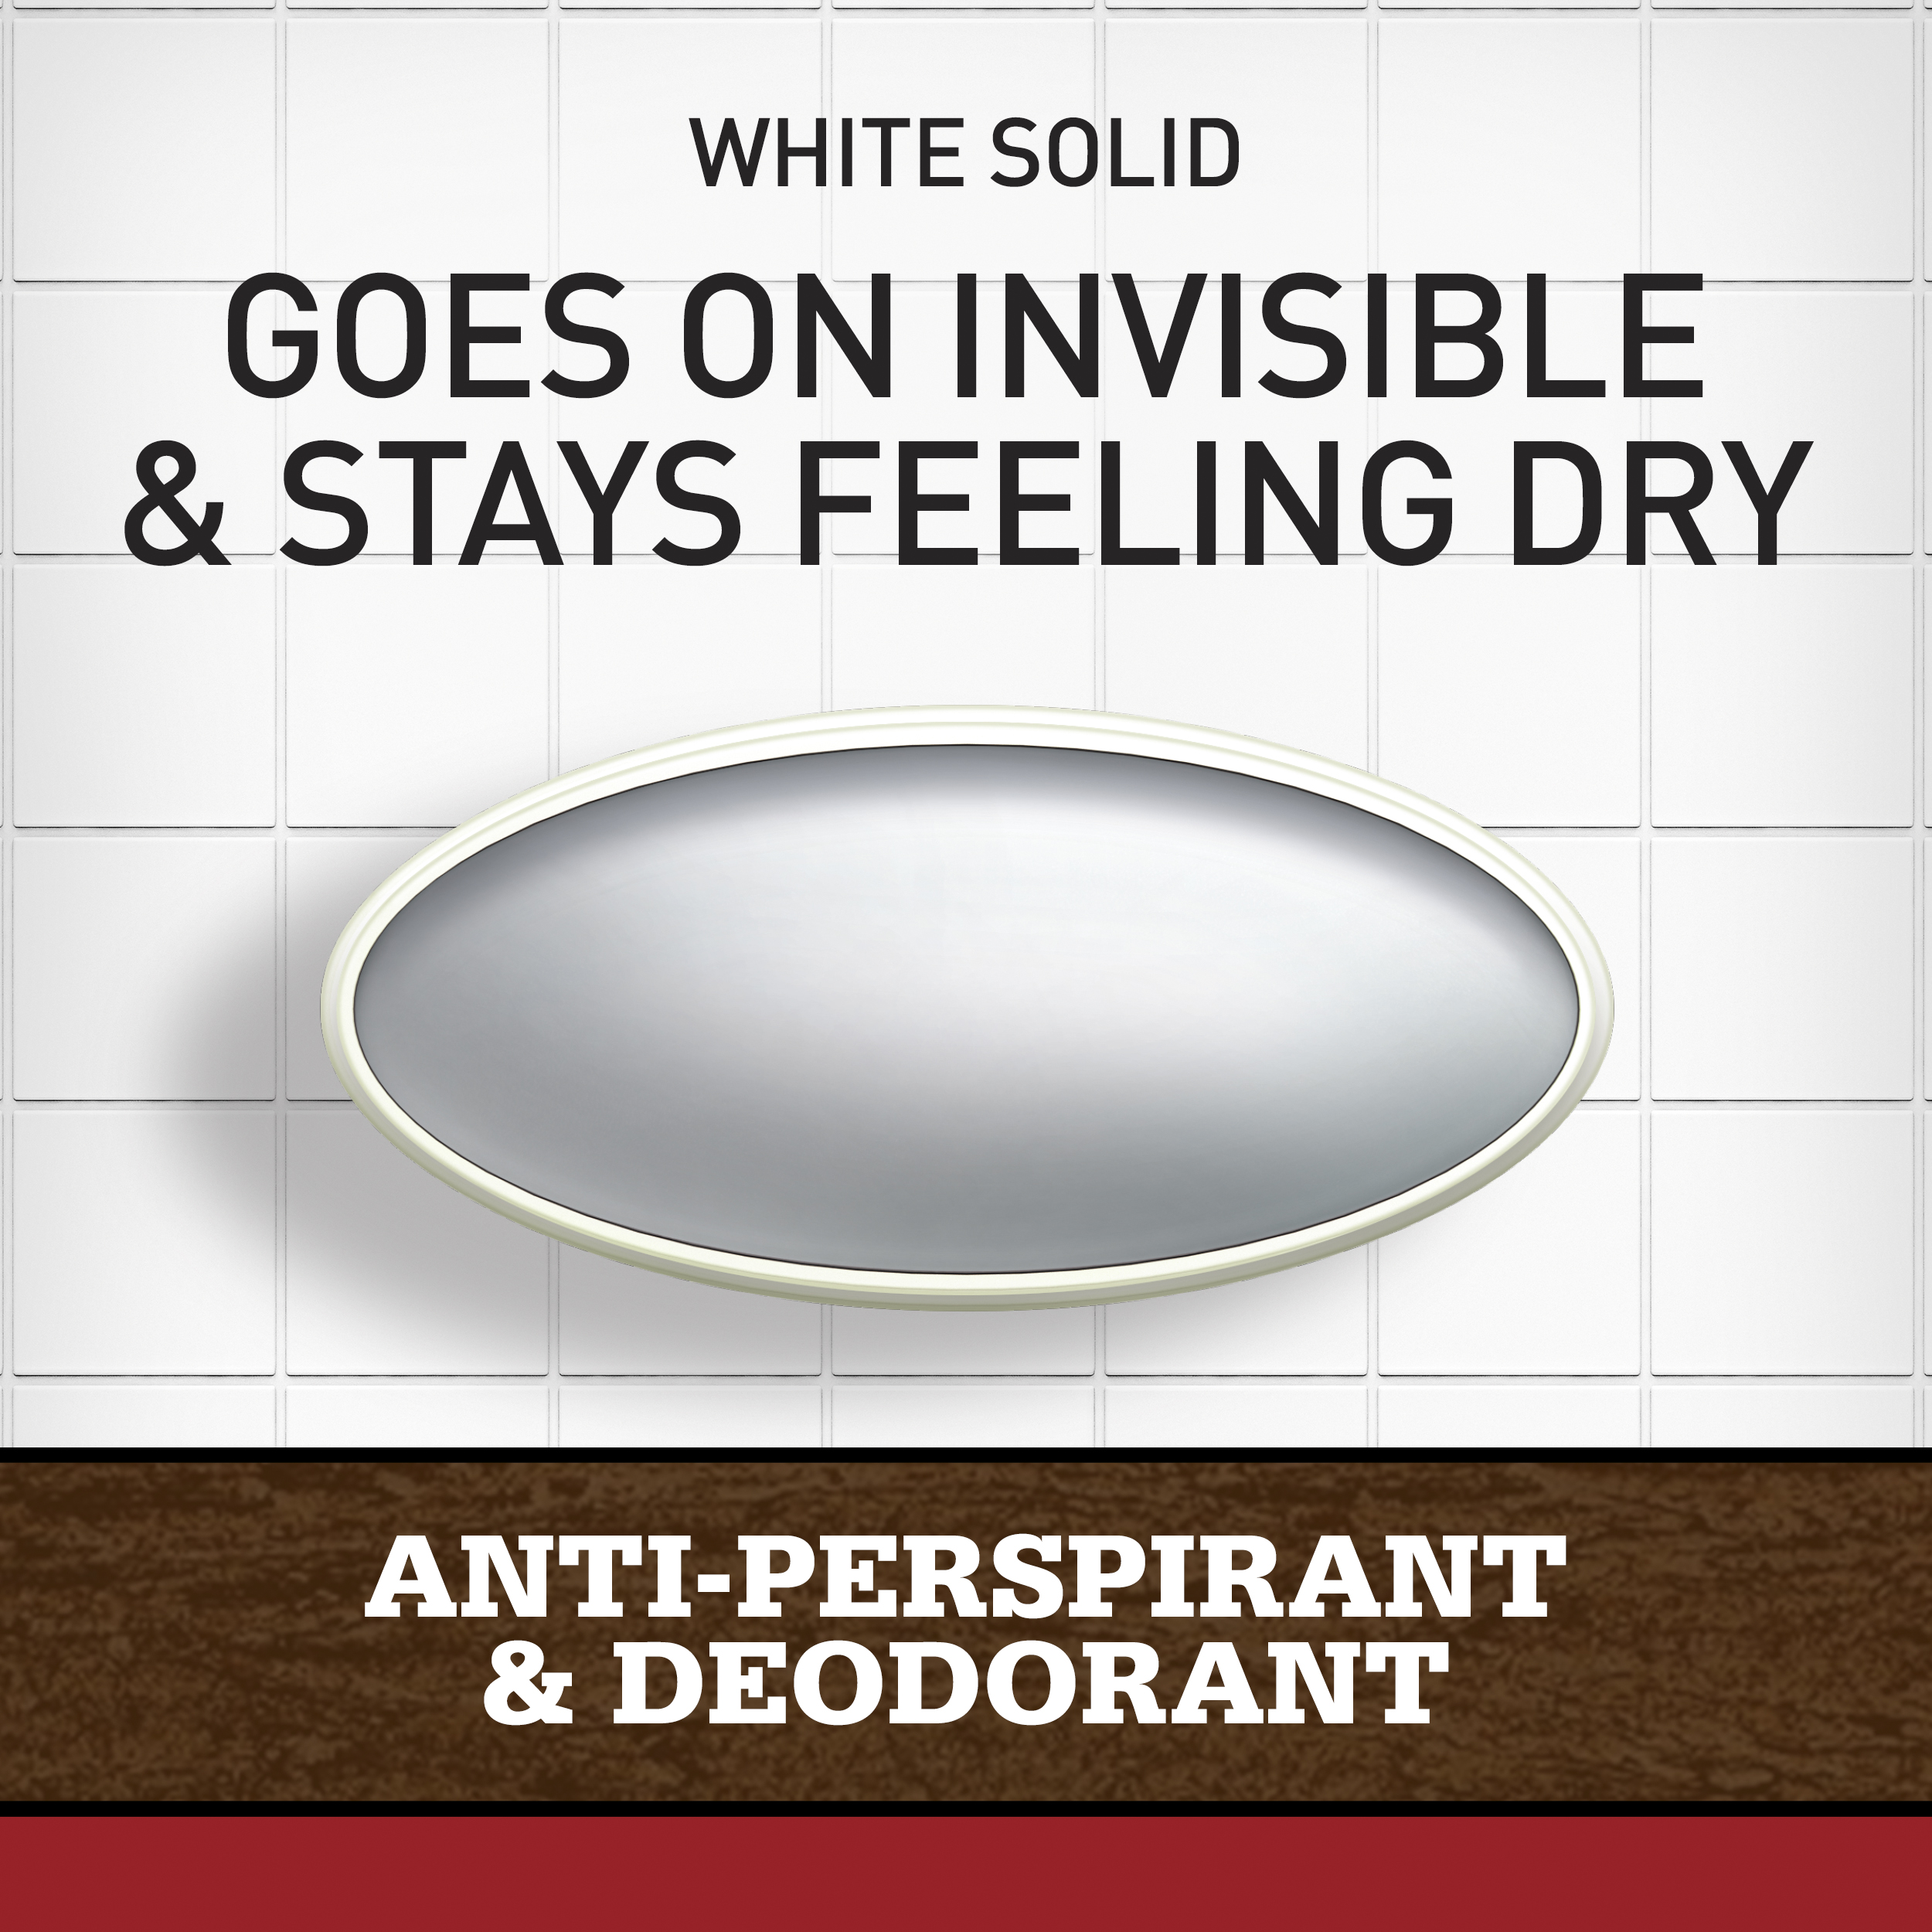 Old Spice Wild Hawkridge Scent Invisible Solid Antiperspirant and Deodorant for Men, 2.6 oz - image 5 of 8